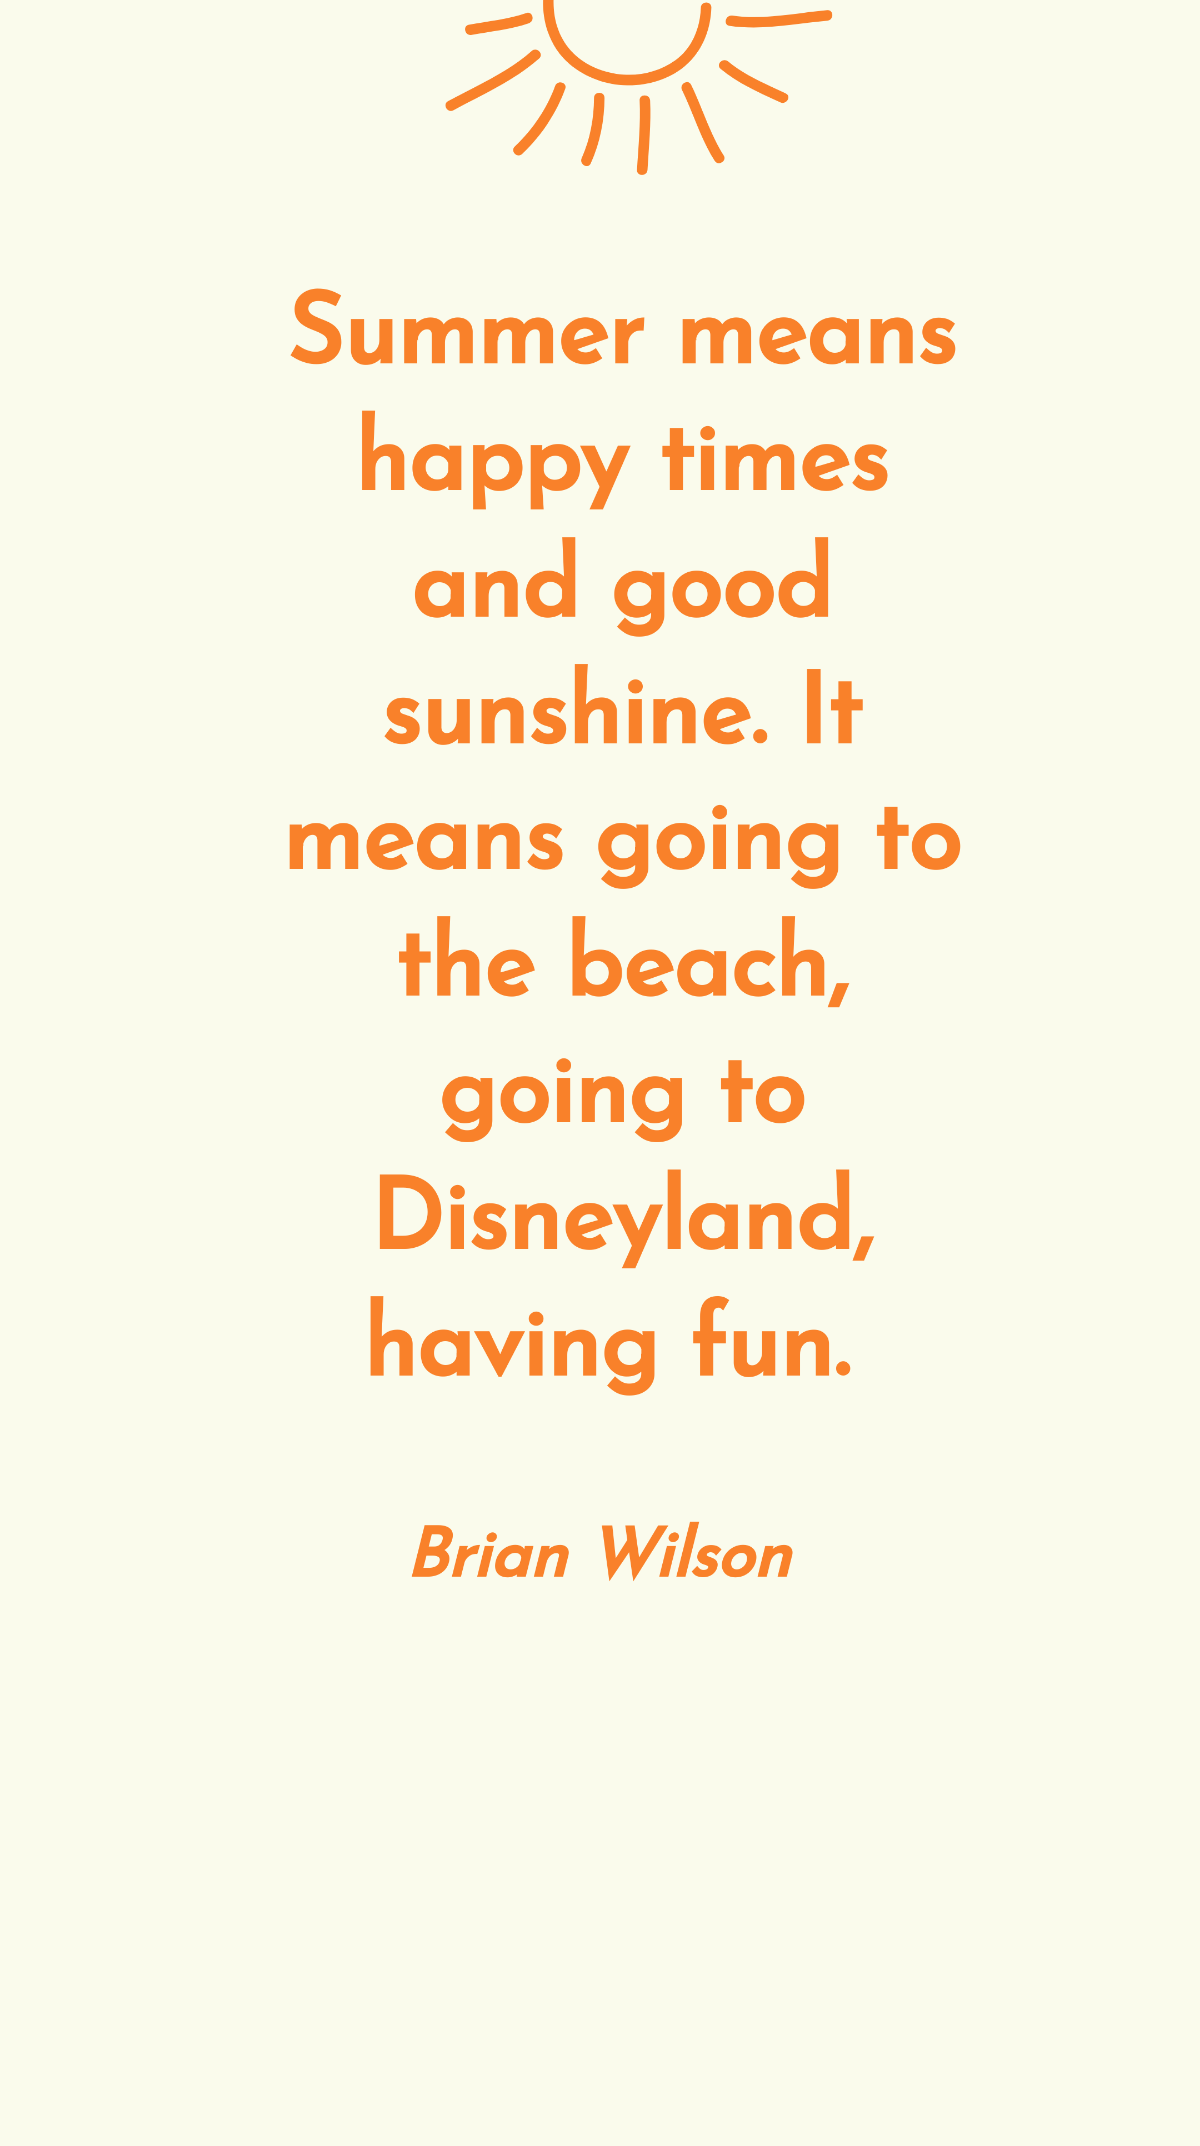 Free Brian Wilson - Summer means happy times and good sunshine. It means going to the beach, going to Disneyland, having fun. Template